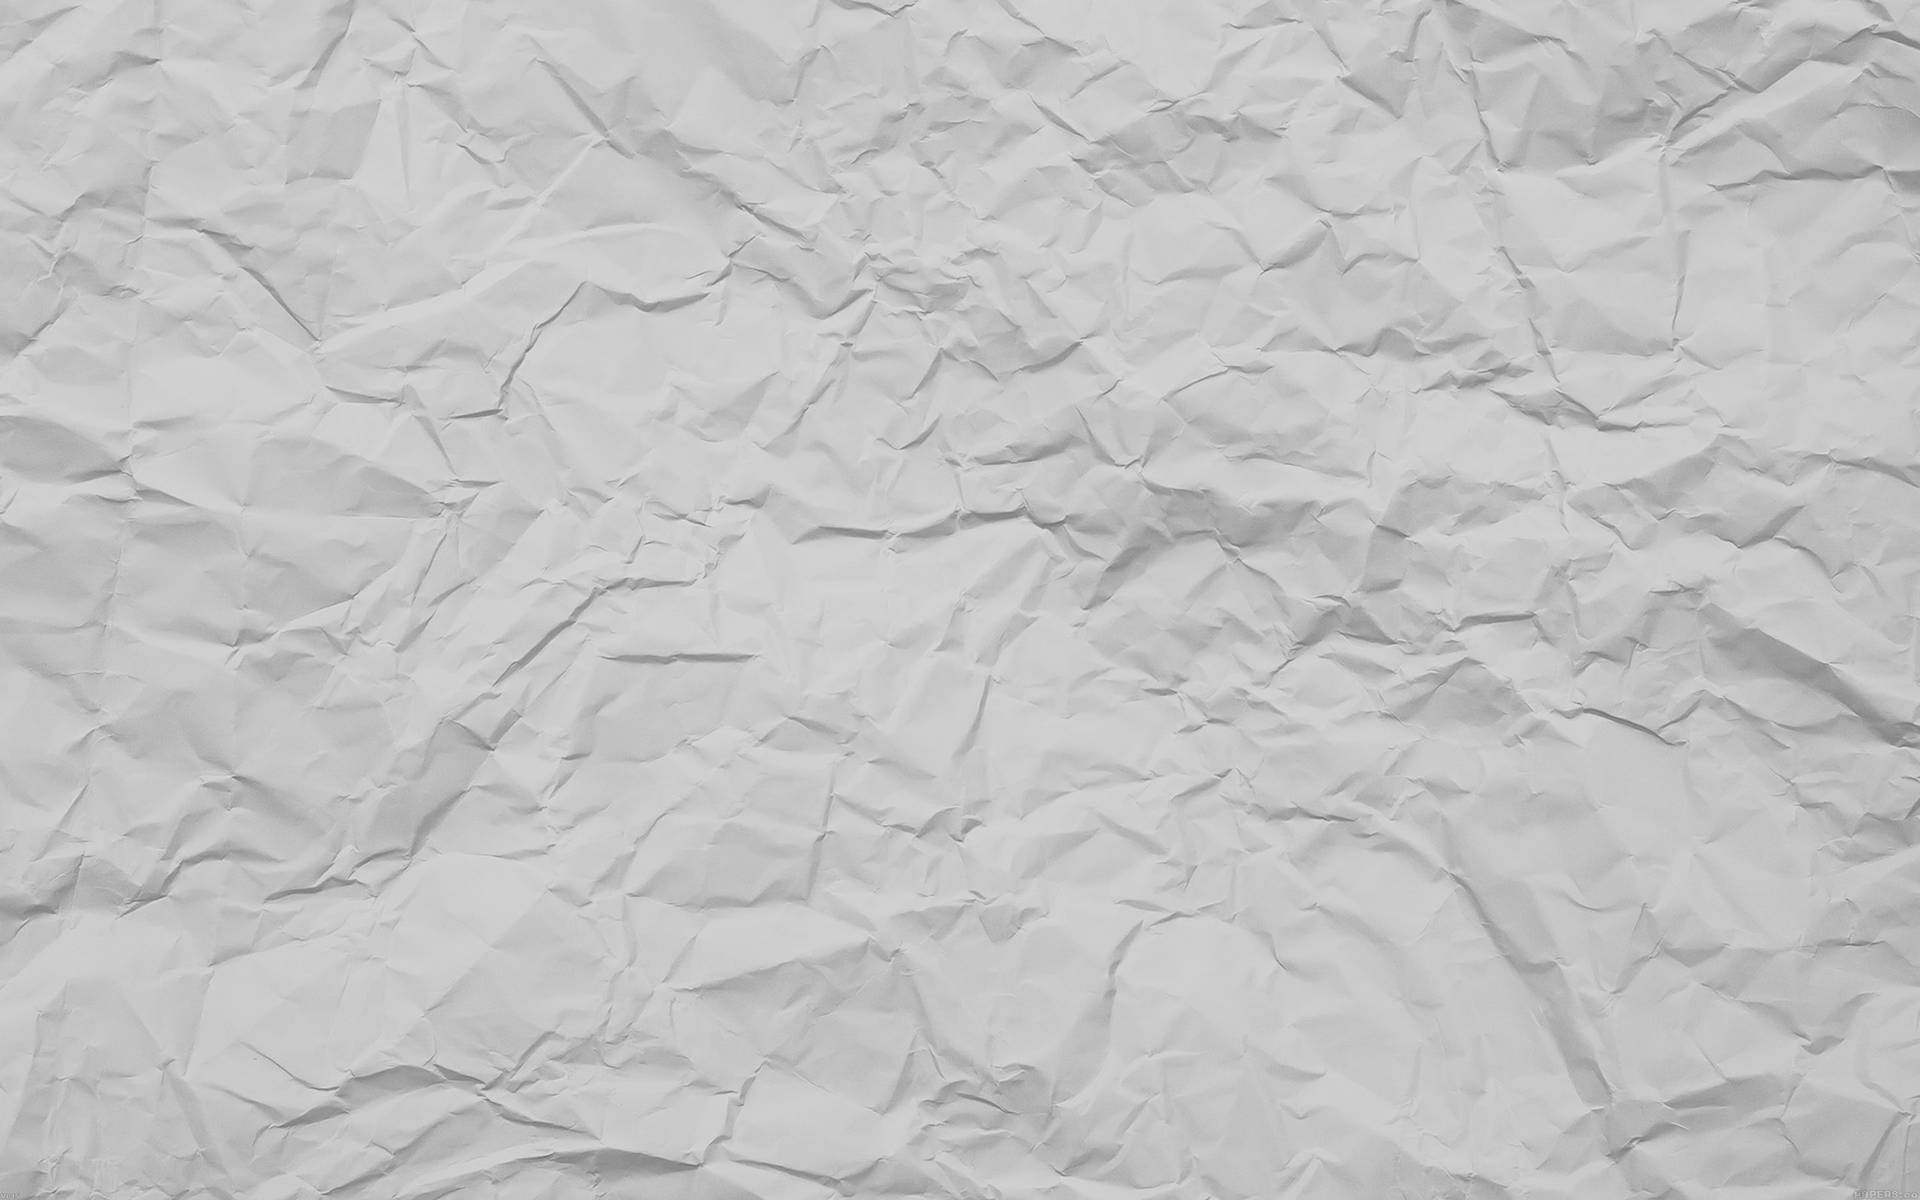 A Detailed Close-up of White Crumpled Paper Texture Wallpaper